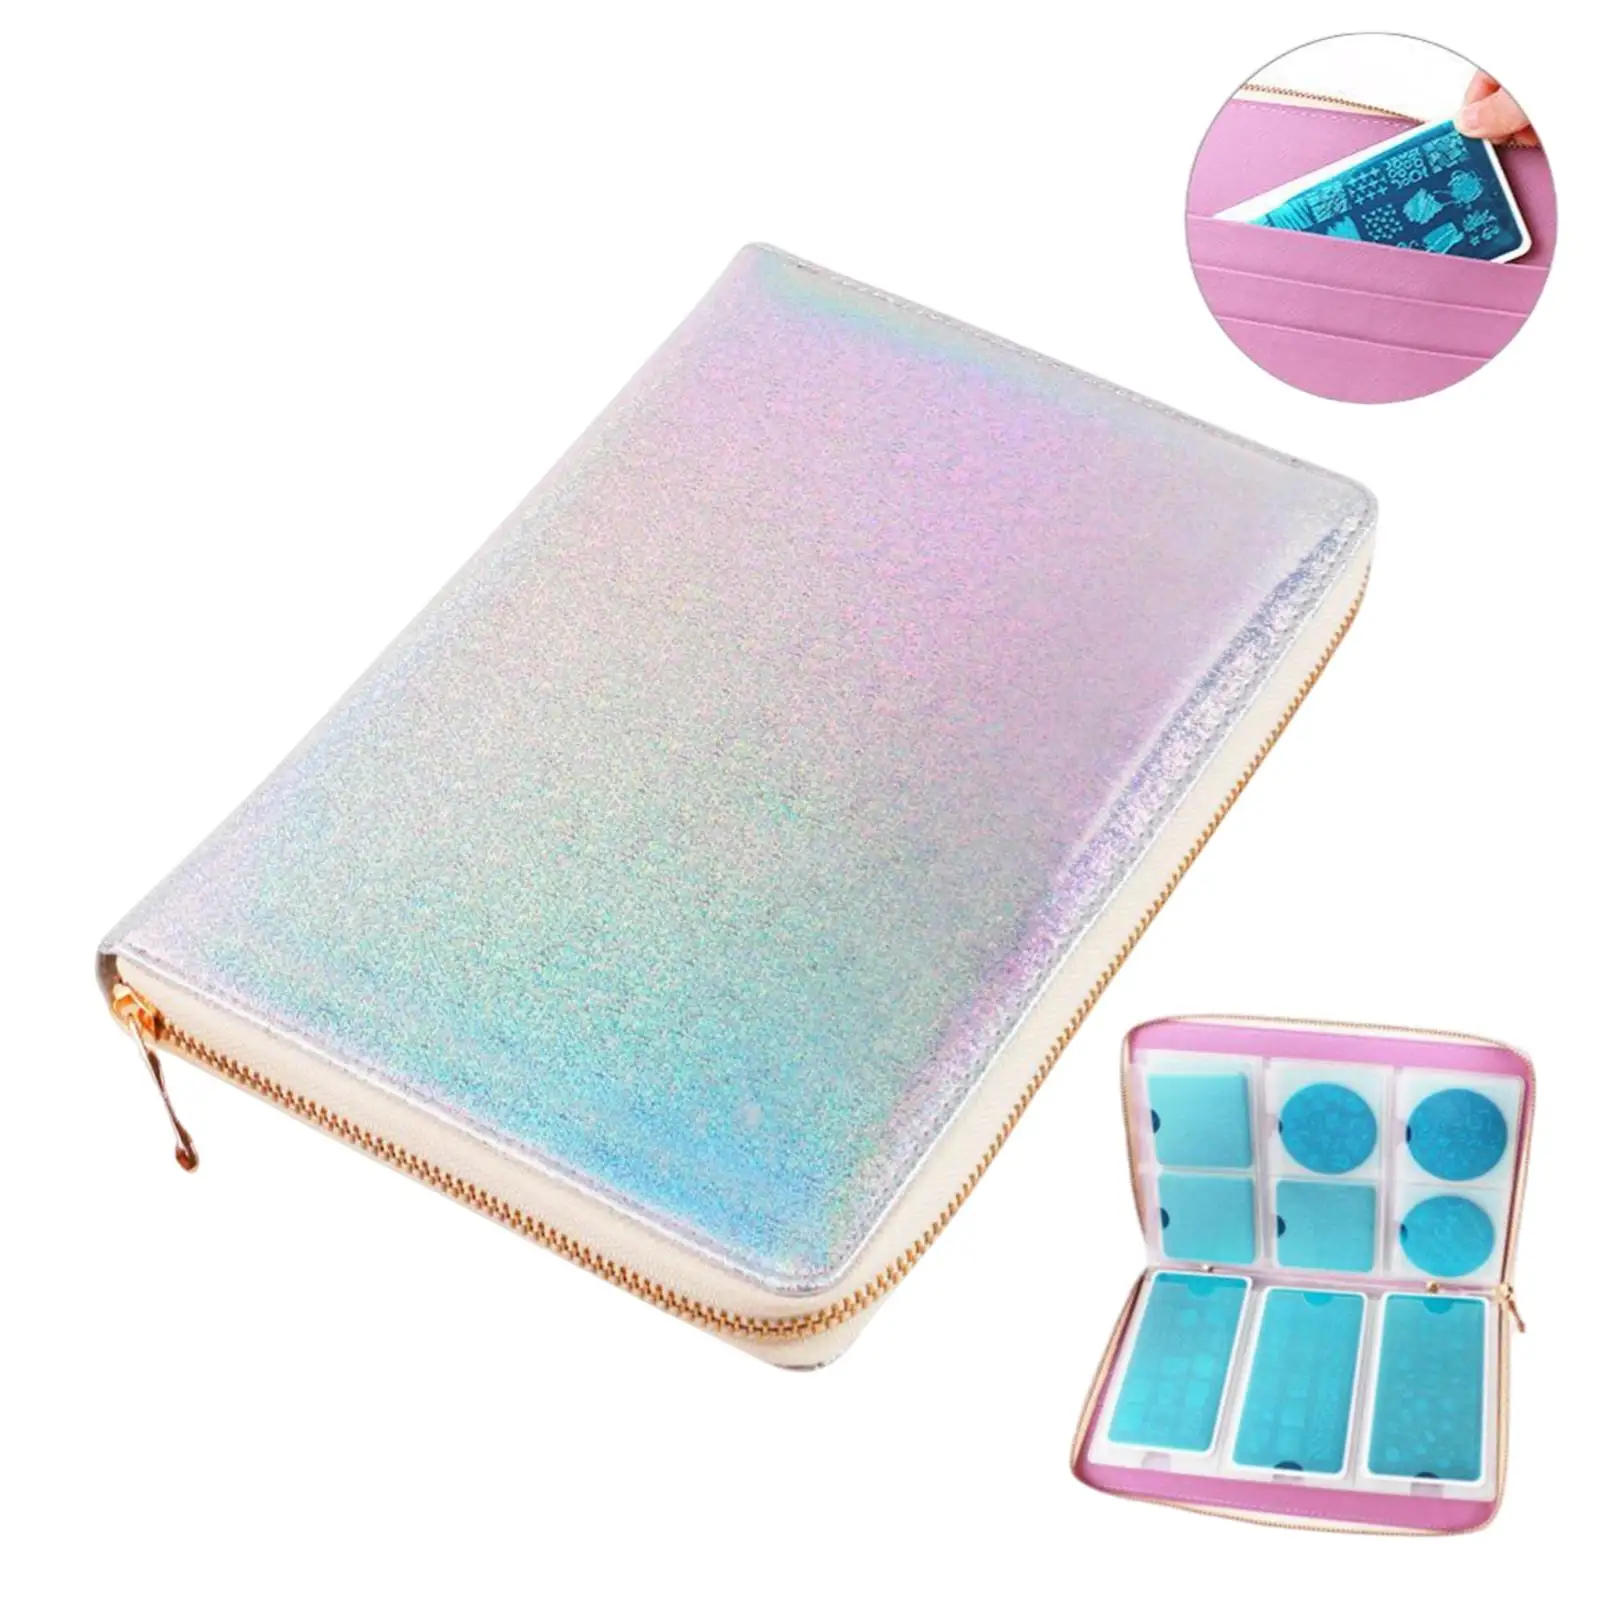 Nail Template Case Style Snap Close DIY Tool Bag Organizer Nail Stamping Plate Holder for Stamping Plates Accessories